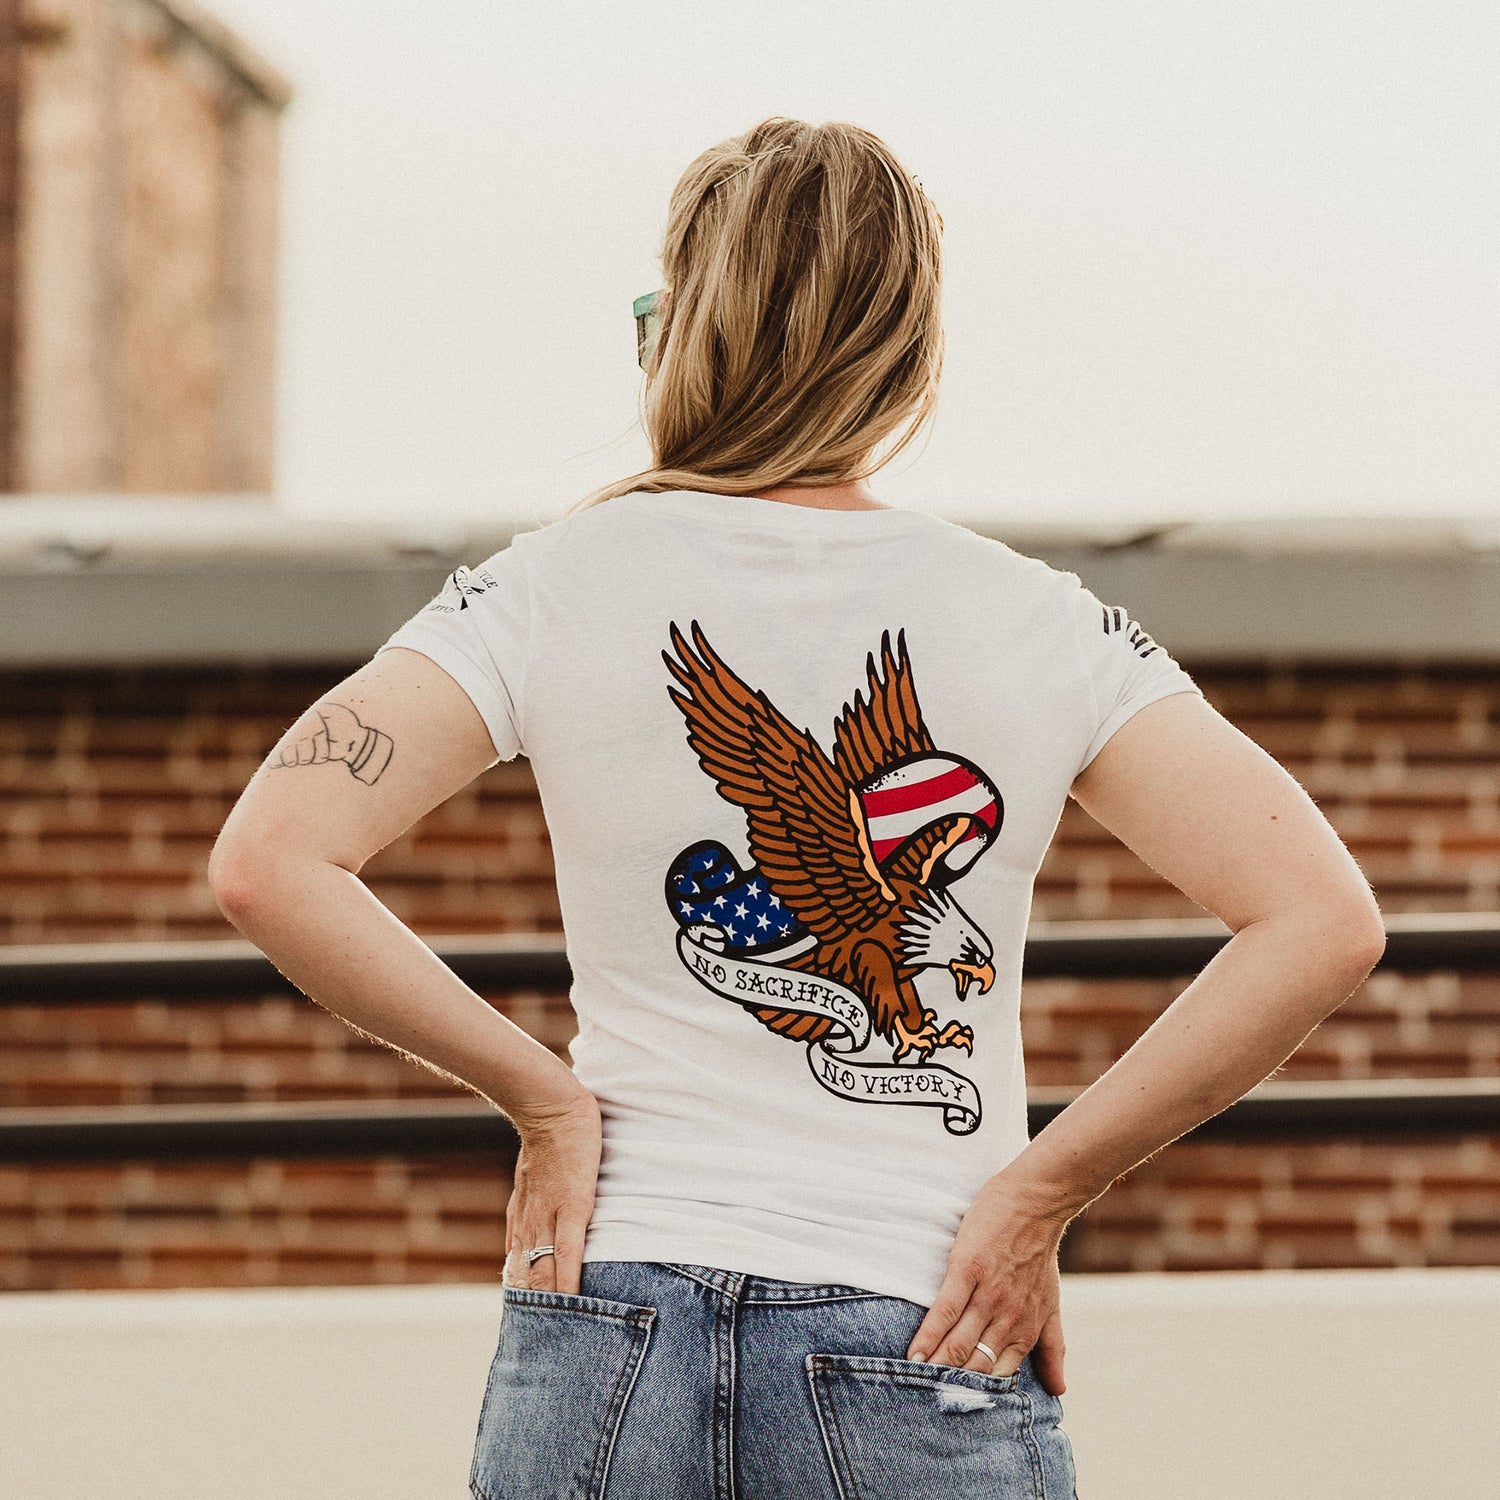 Patriotic Tops for Women - WWII Inspired Graphic 